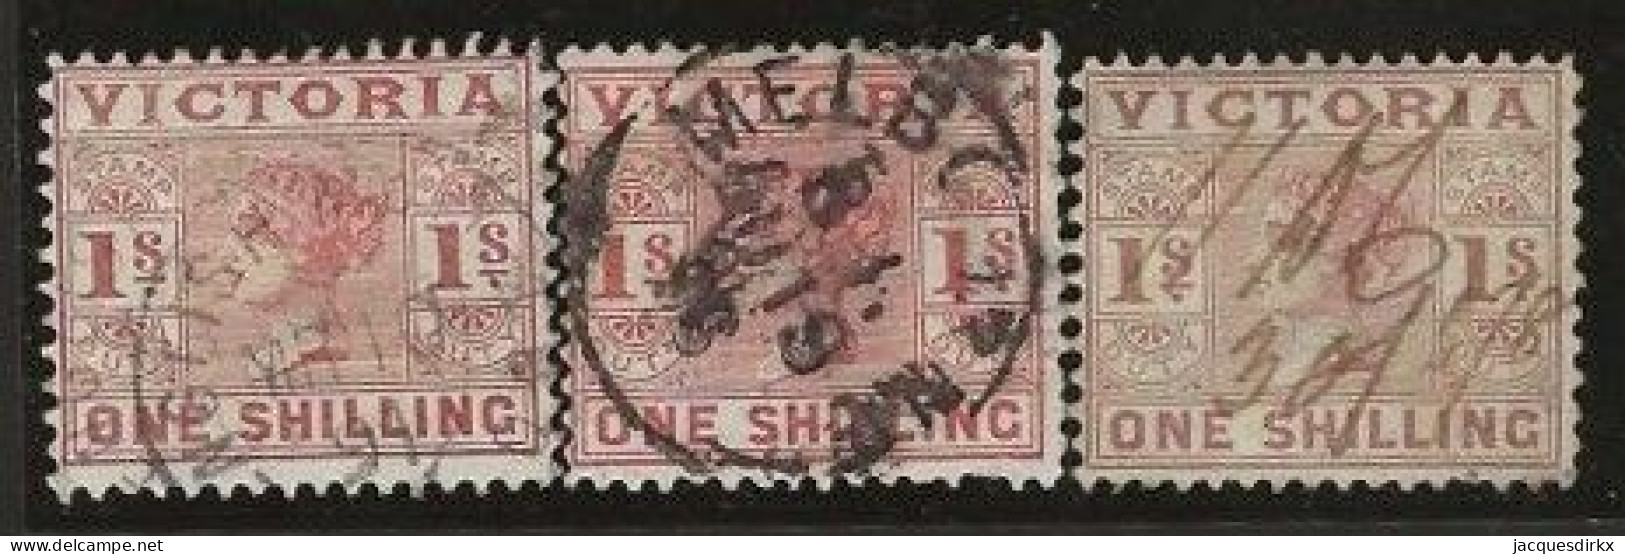 Victoria    .   SG    .   332  3x    .   O      .     Cancelled - Used Stamps